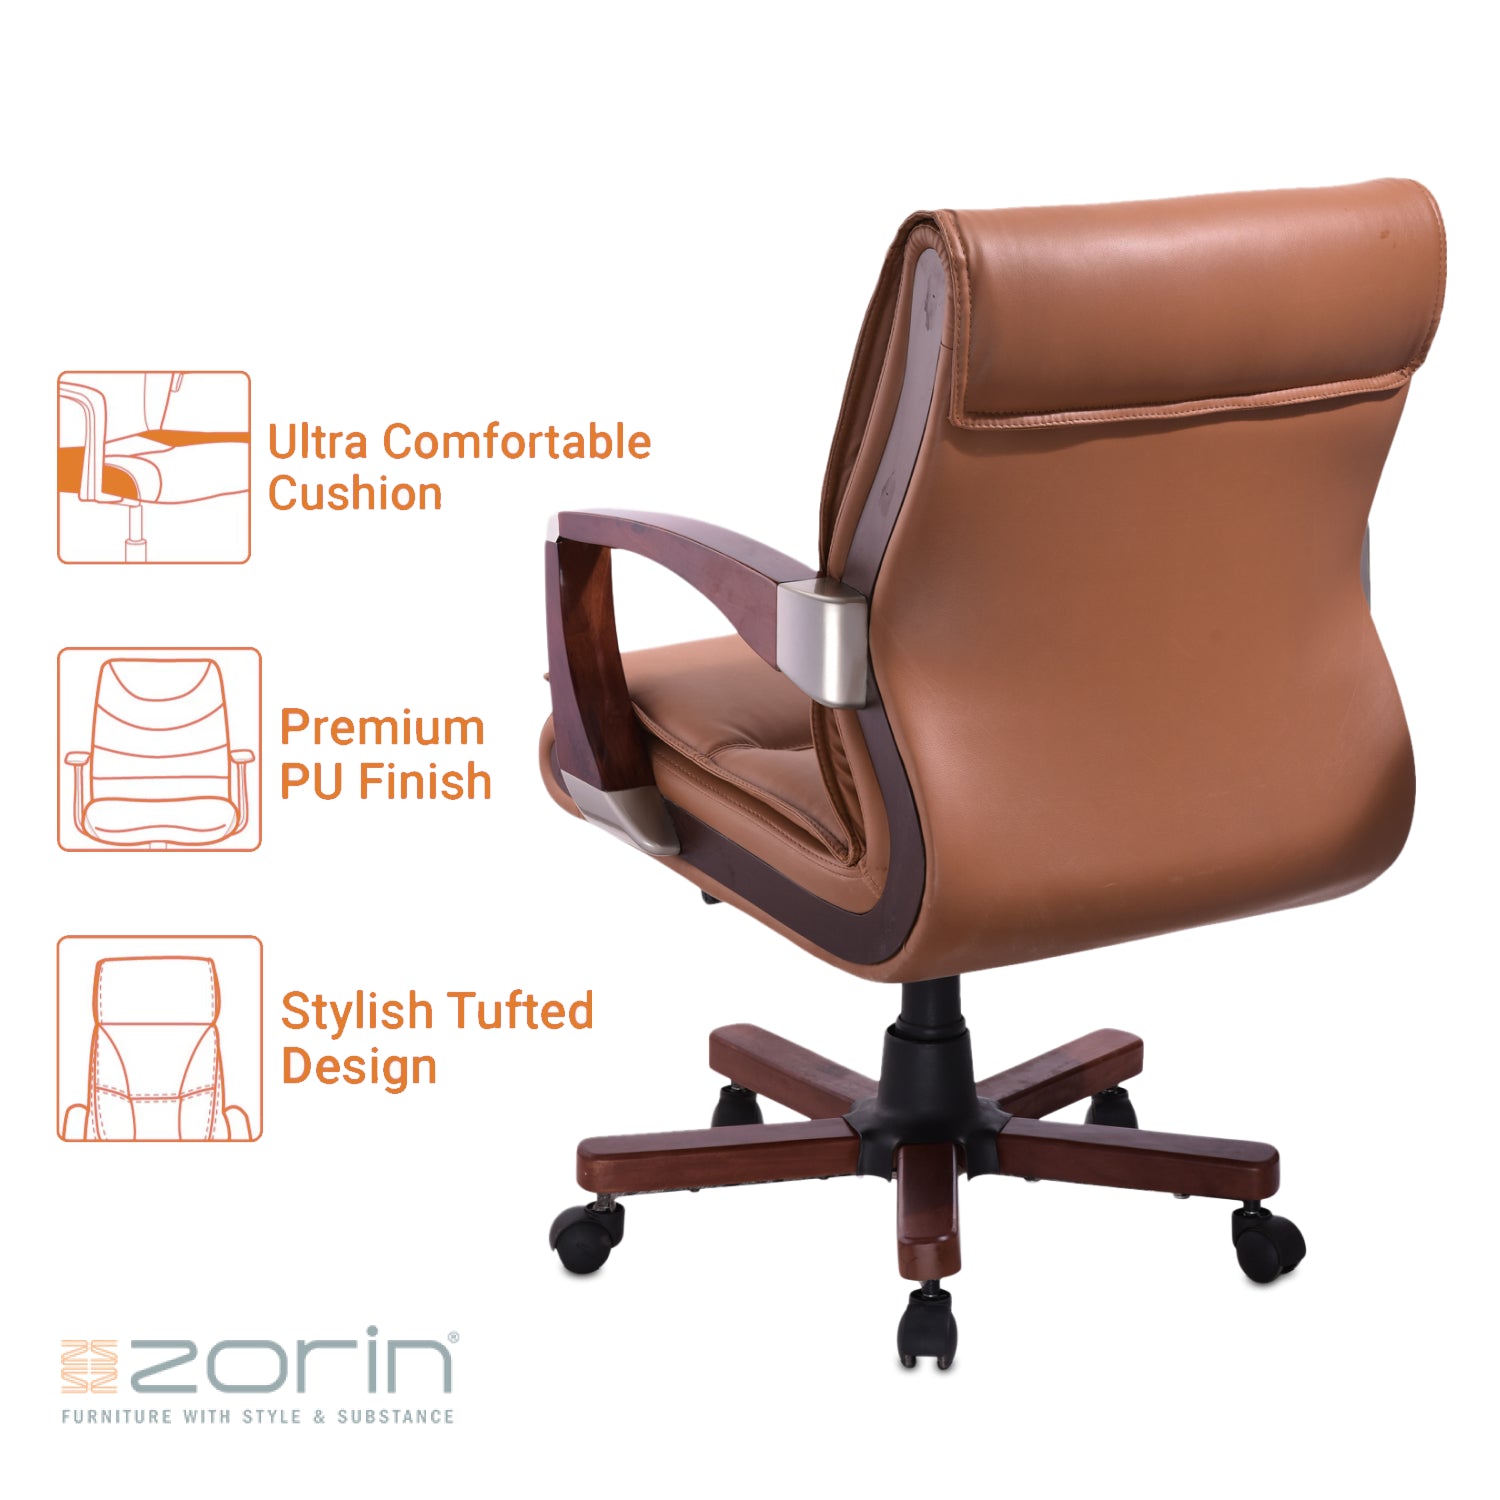 ZFB1002 Medium Back Chair by Zorin in Tan Color Zorin